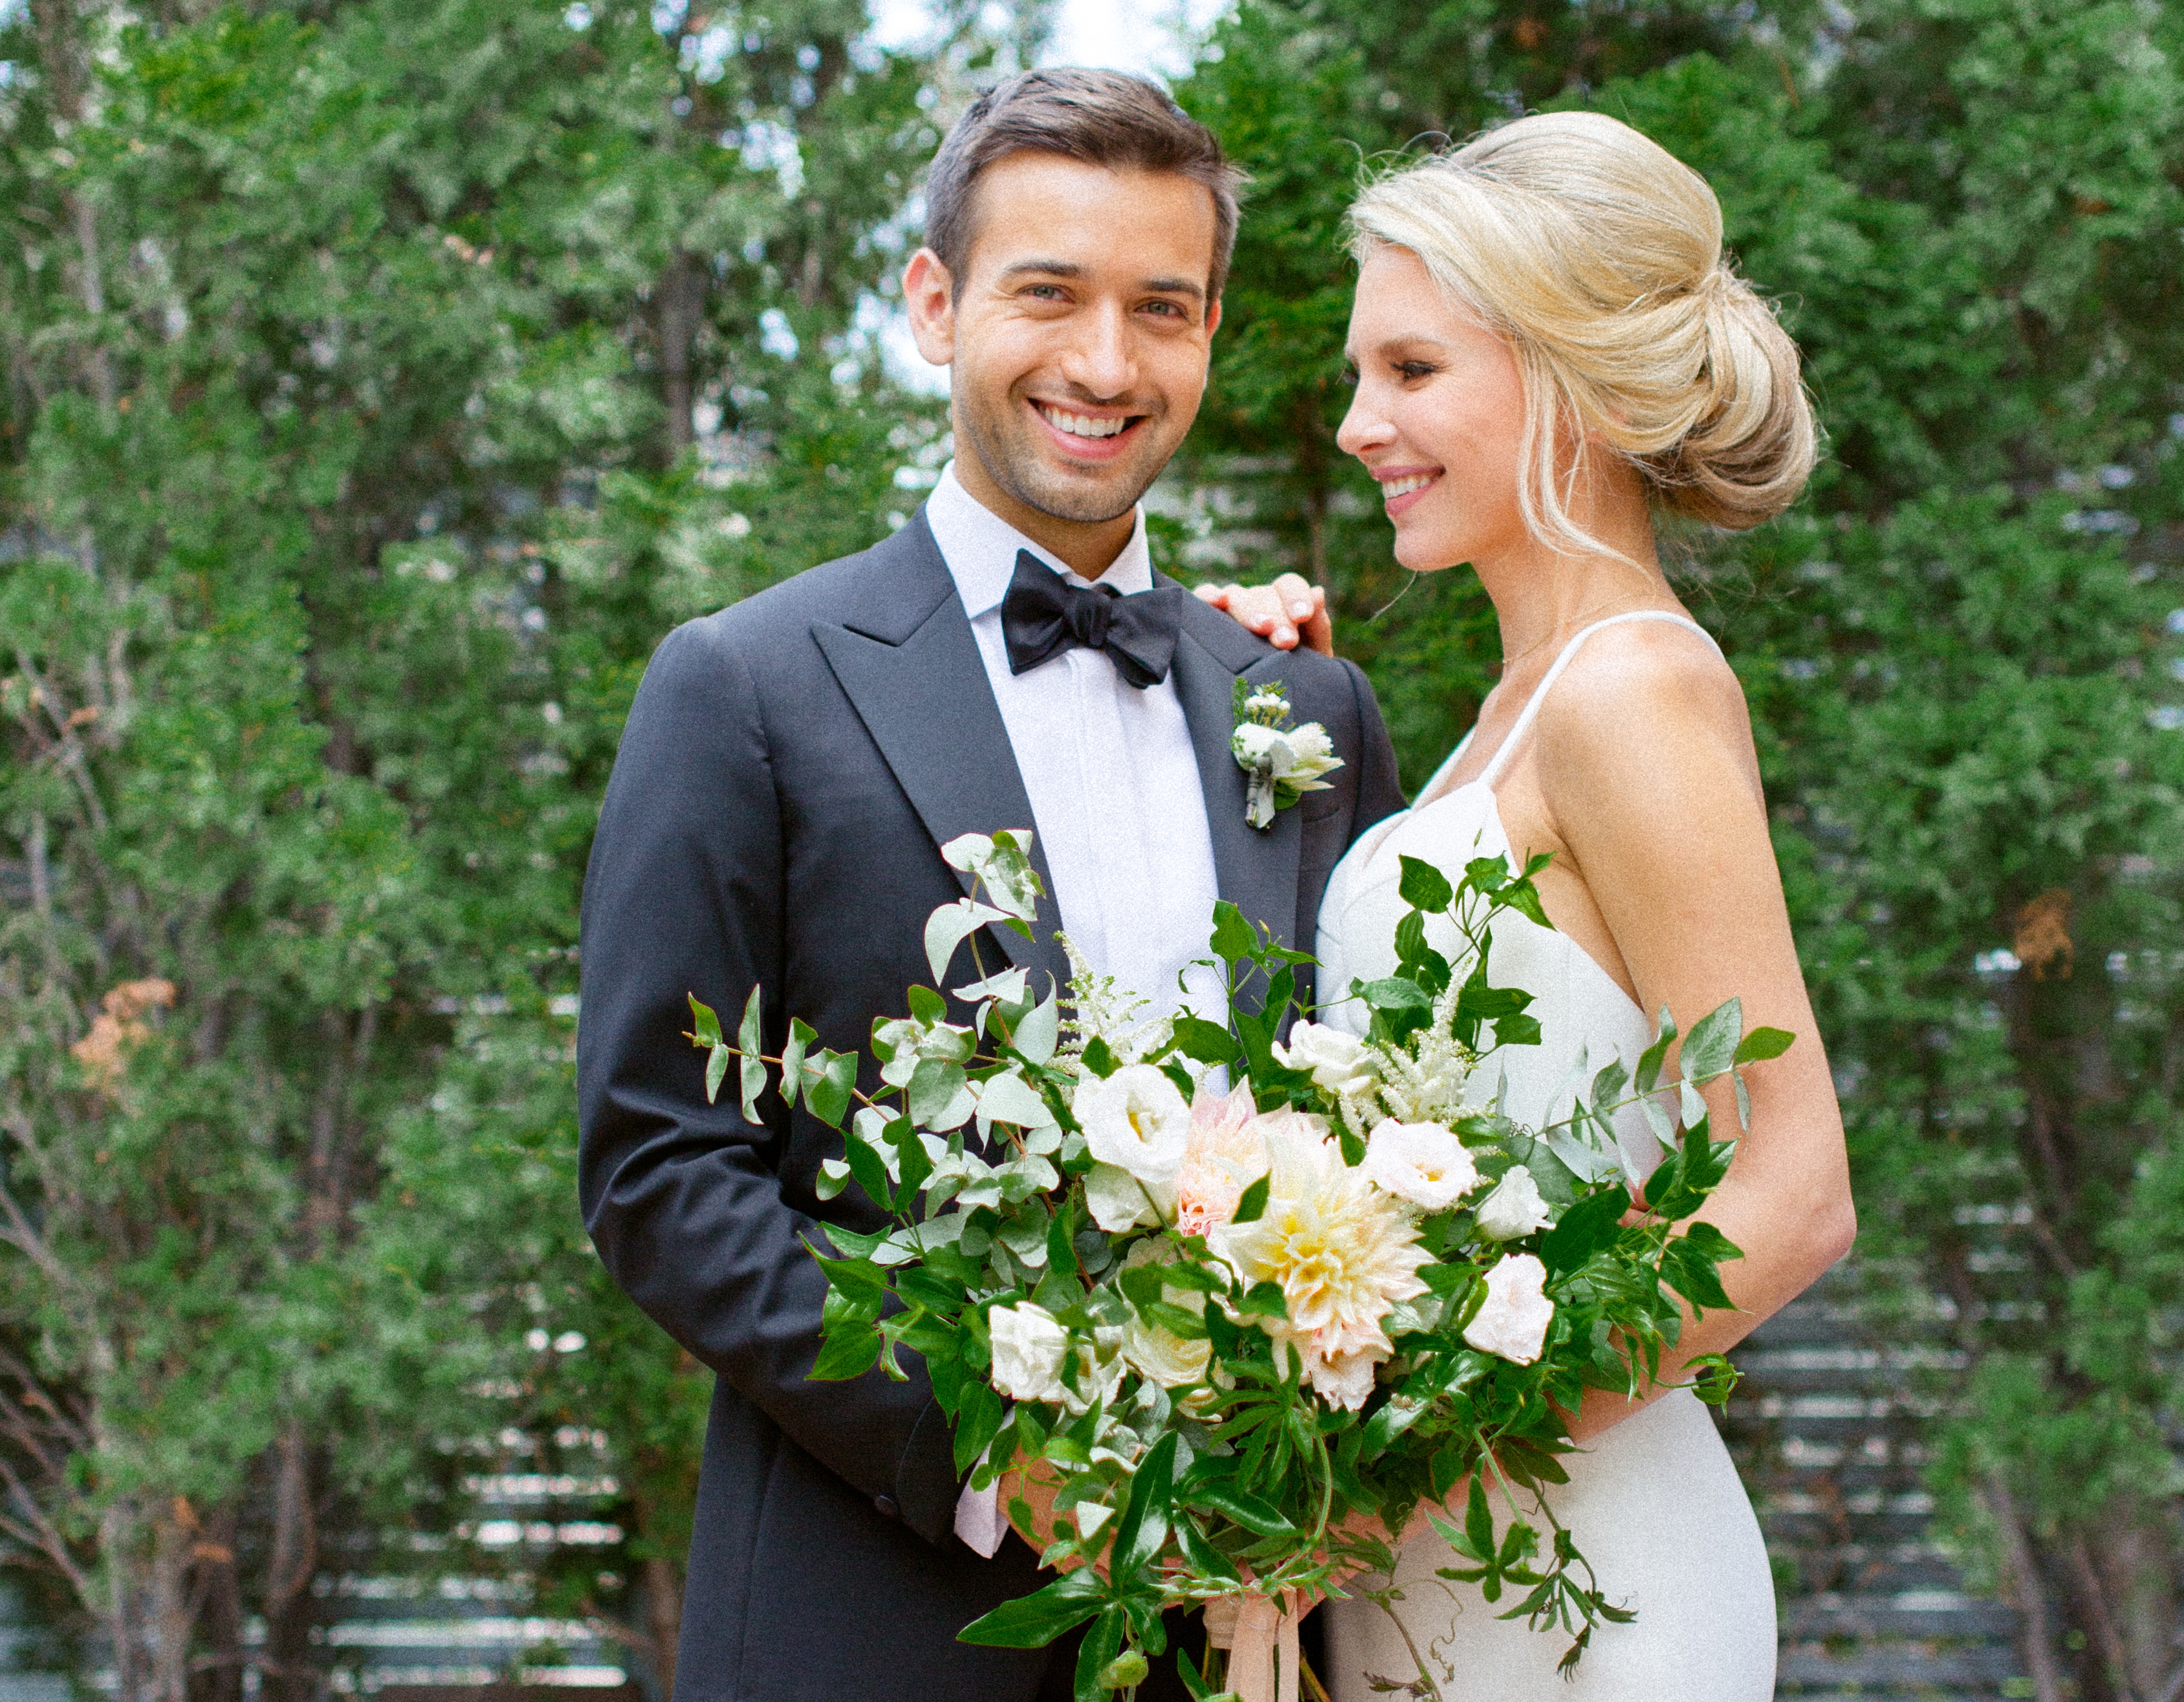 Groom Tips for your wedding day